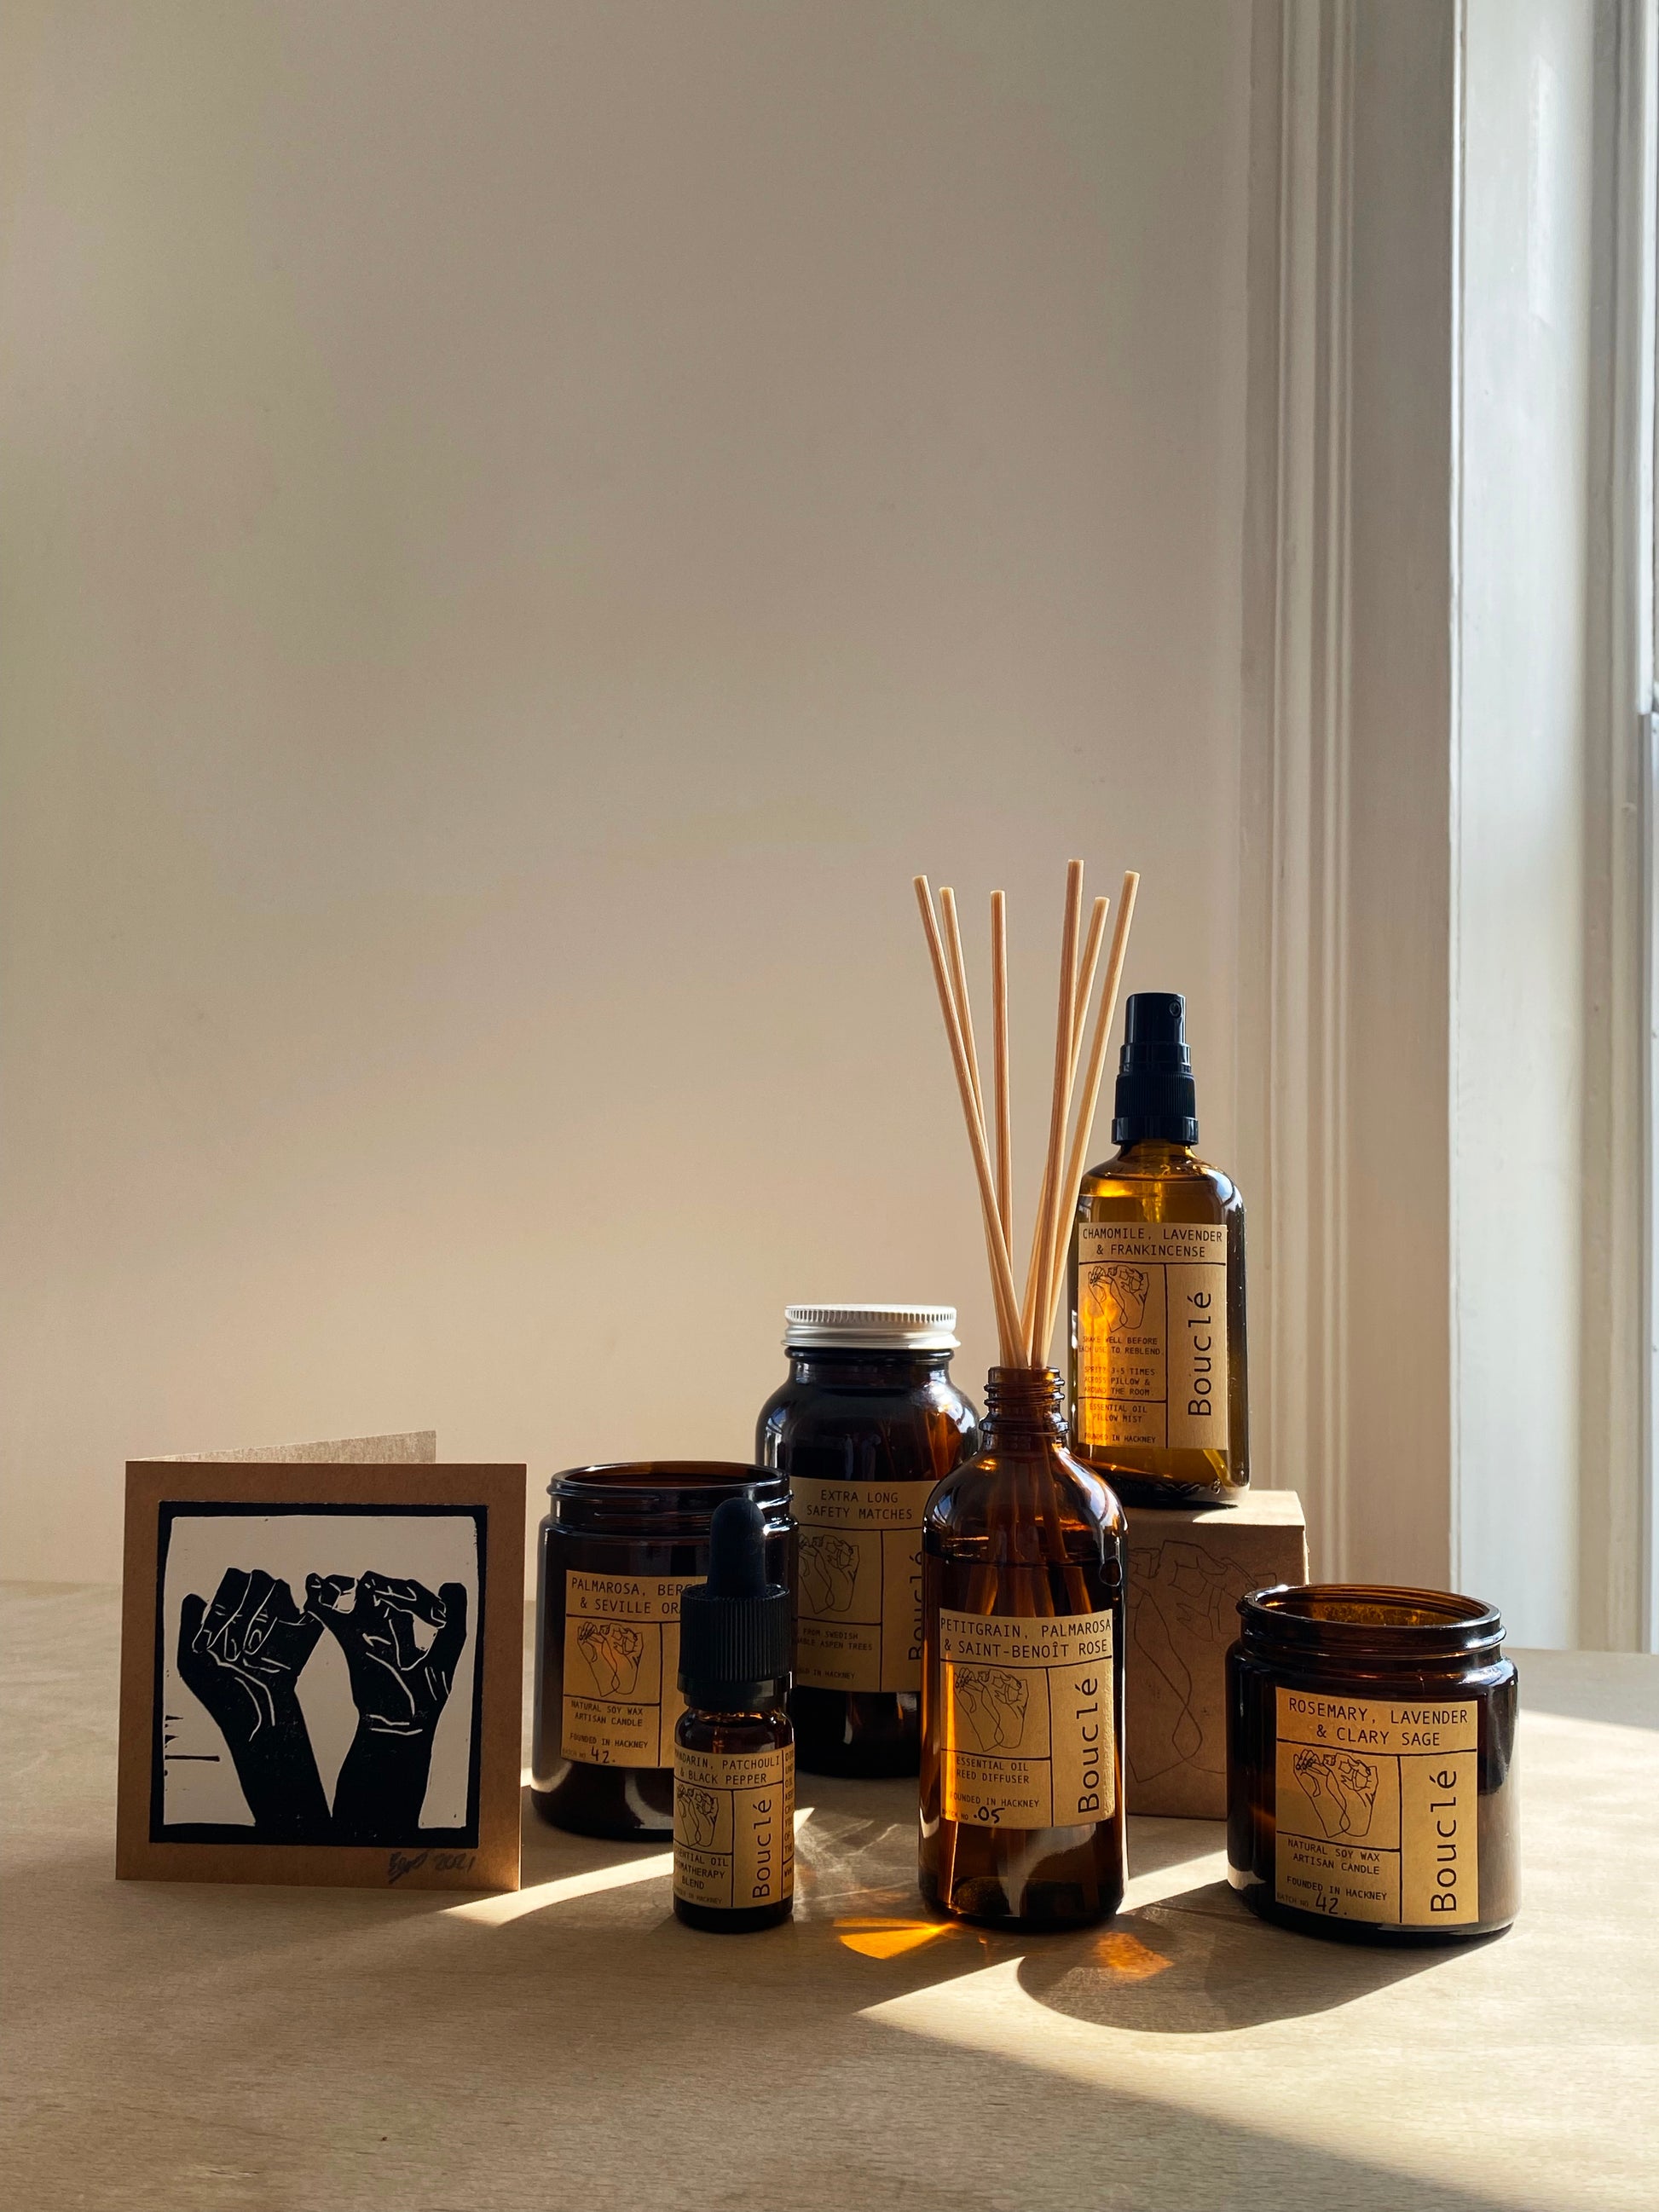 Bouclé London hand crafted natural products including soy wax candle, essential oil reed diffuser, pillow spray, room spray & essential oil blends.